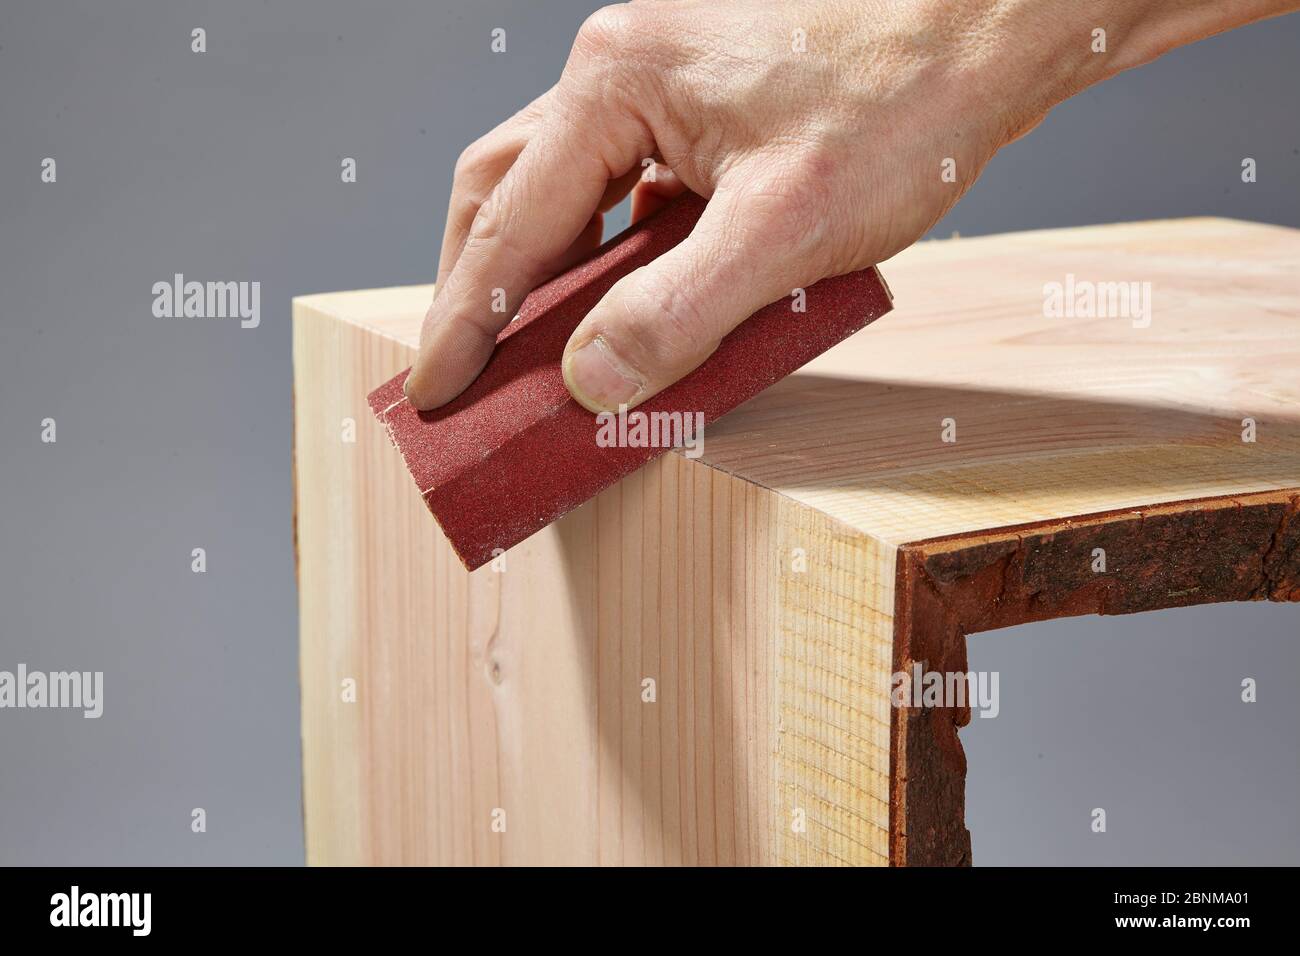 Building a wooden shelf, do-it-yourself production, step-by-step, step 9 Sanding the outer edge after the glue has hardened with the help of a sanding block Stock Photo